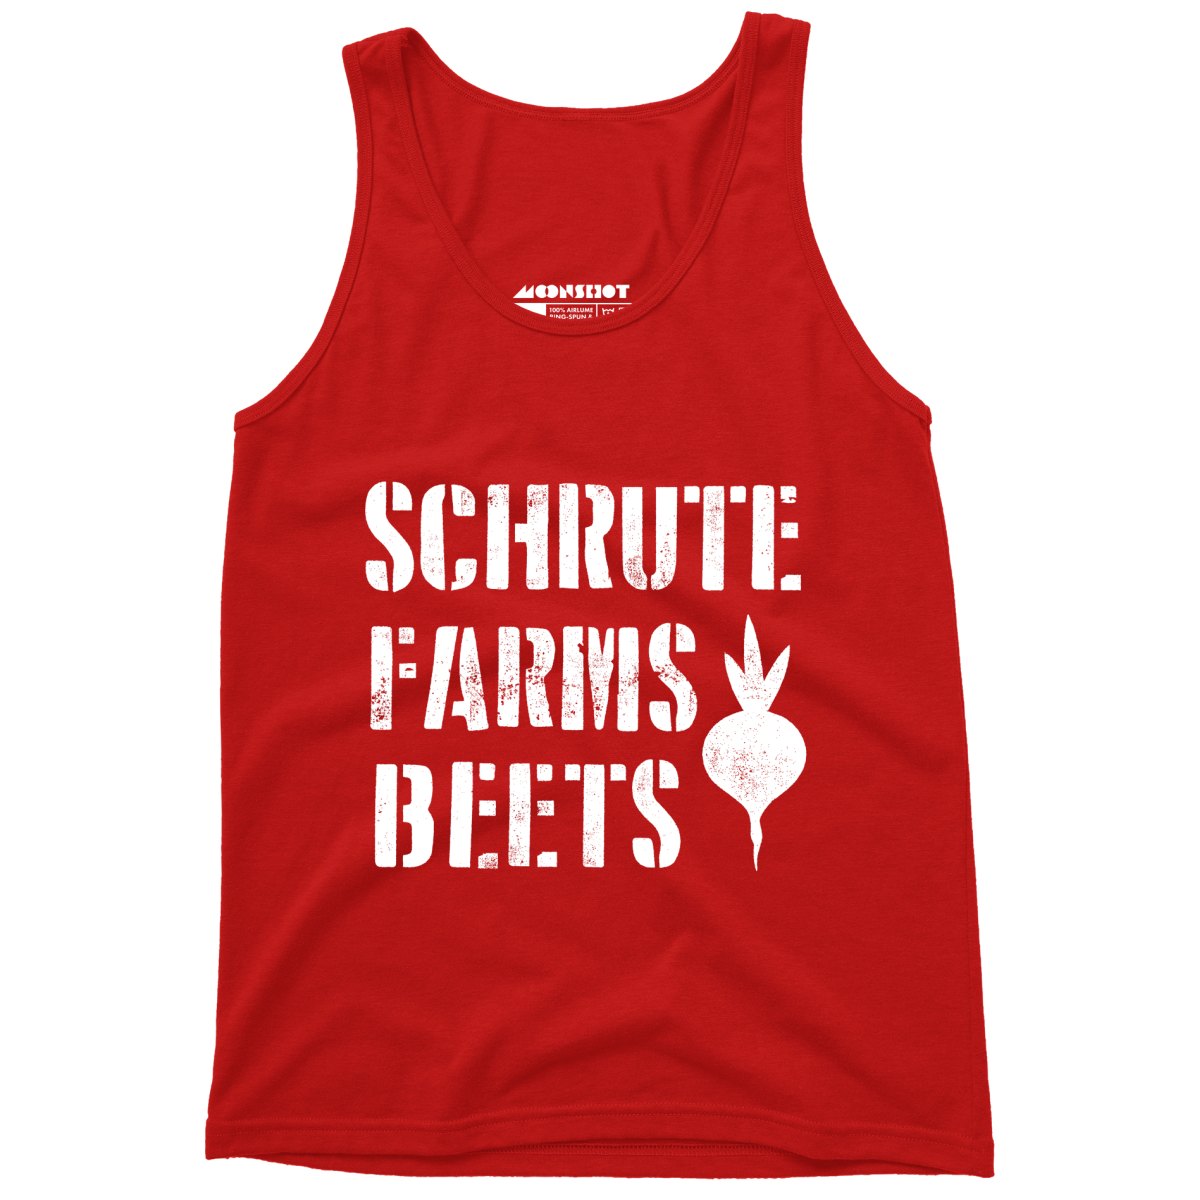 Schrute Farms Beets - Unisex Tank Top